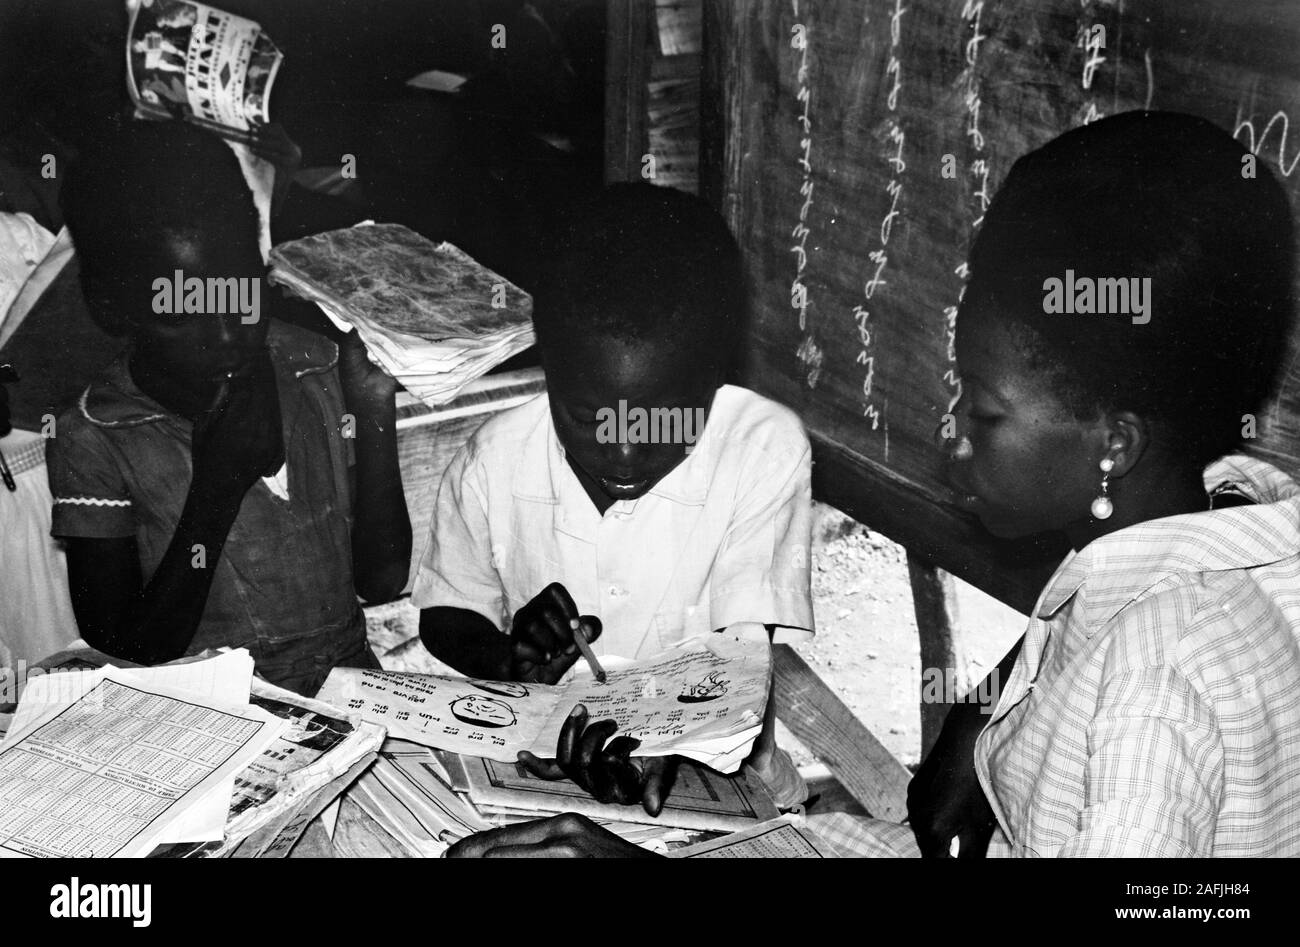 Schule aus Privatinitiative haitianischer Bürger am Rande von Port-au-Prince, 1967. School founded on private venture of Haitian citizens in the outskirts of Port au Prince, 1967. Stock Photo